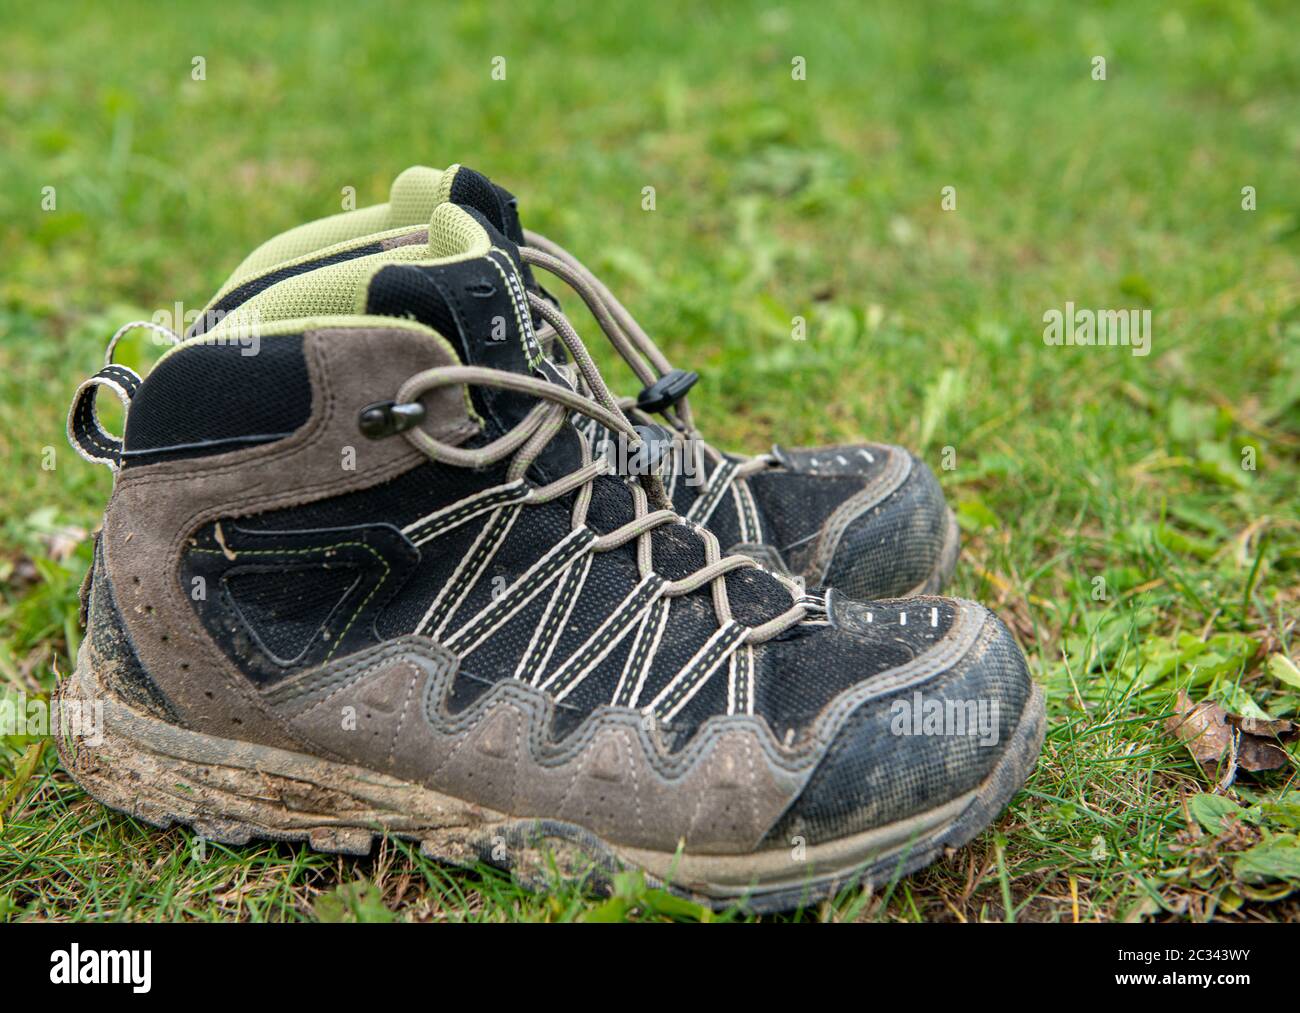 Pair of traveler hiker shoes standing in the grass Stock Photo